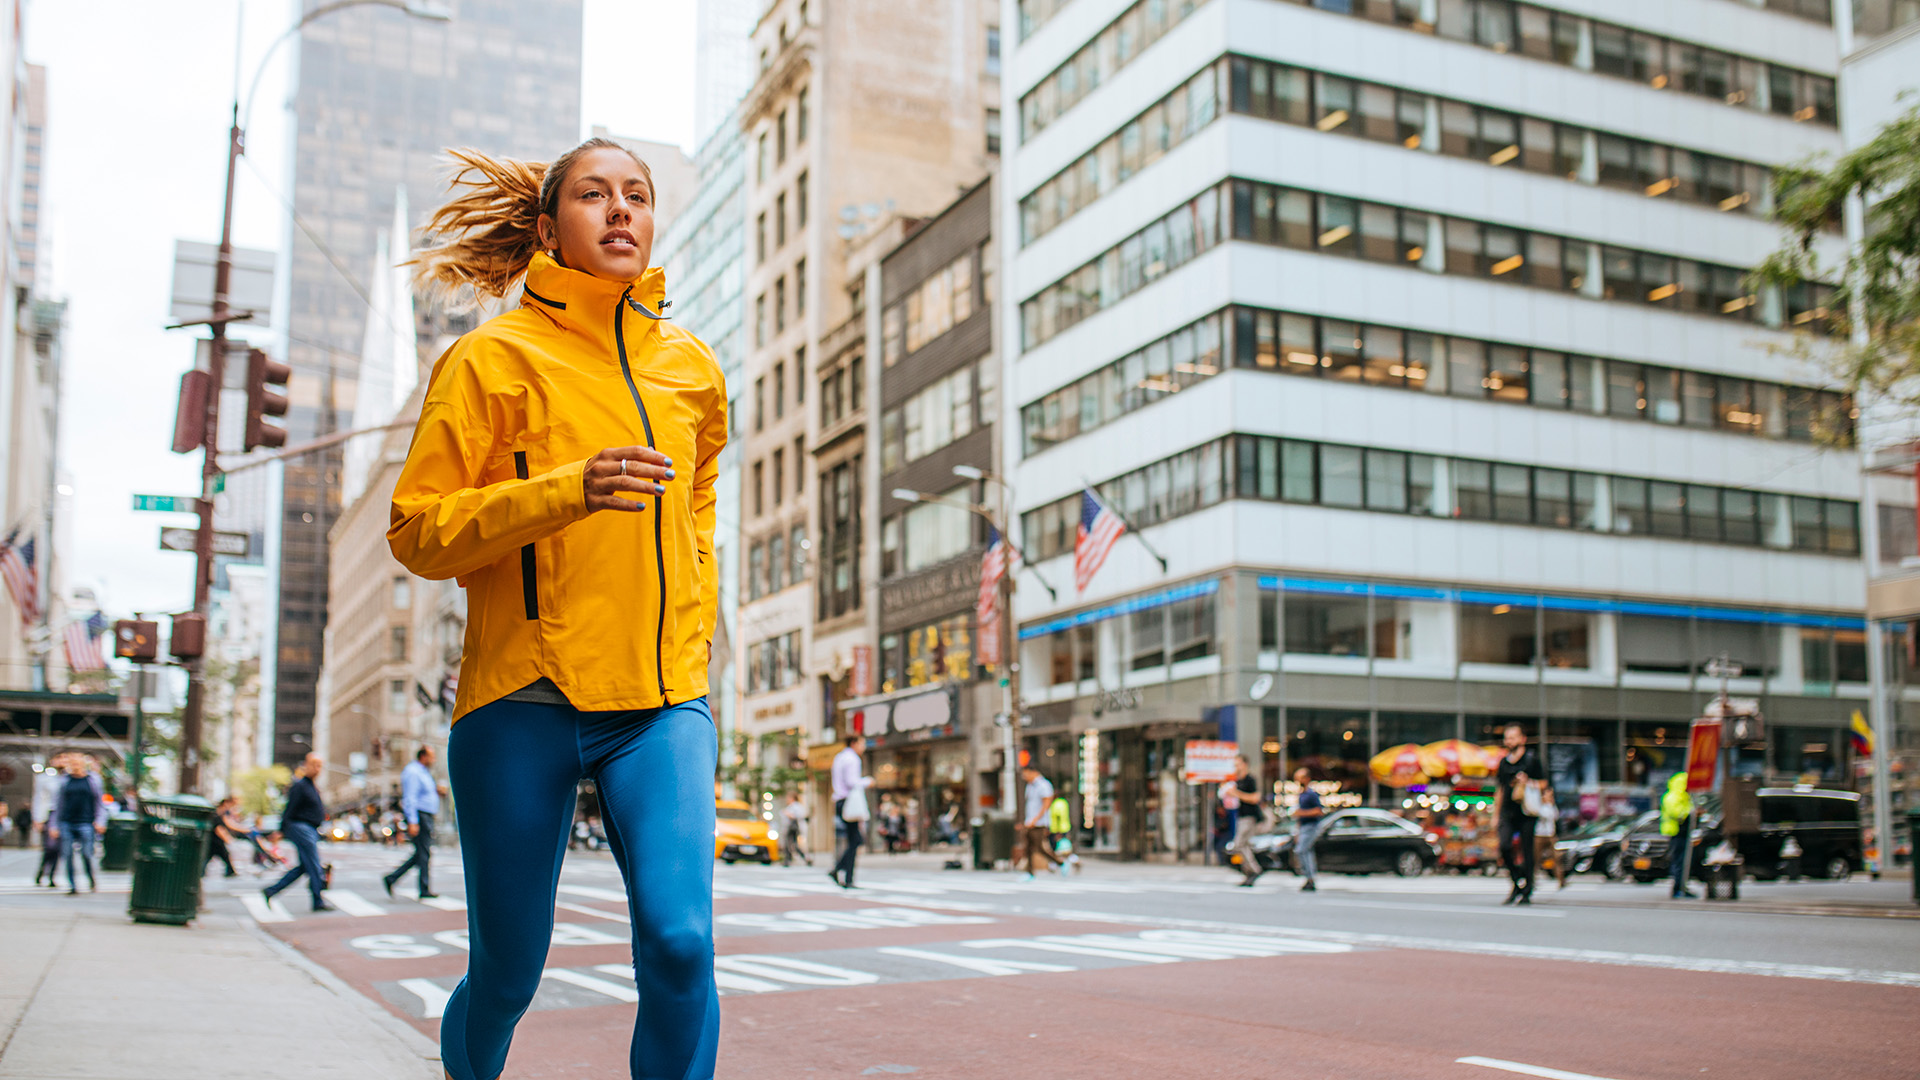 A woman in a yellow jacket jogging in New York City